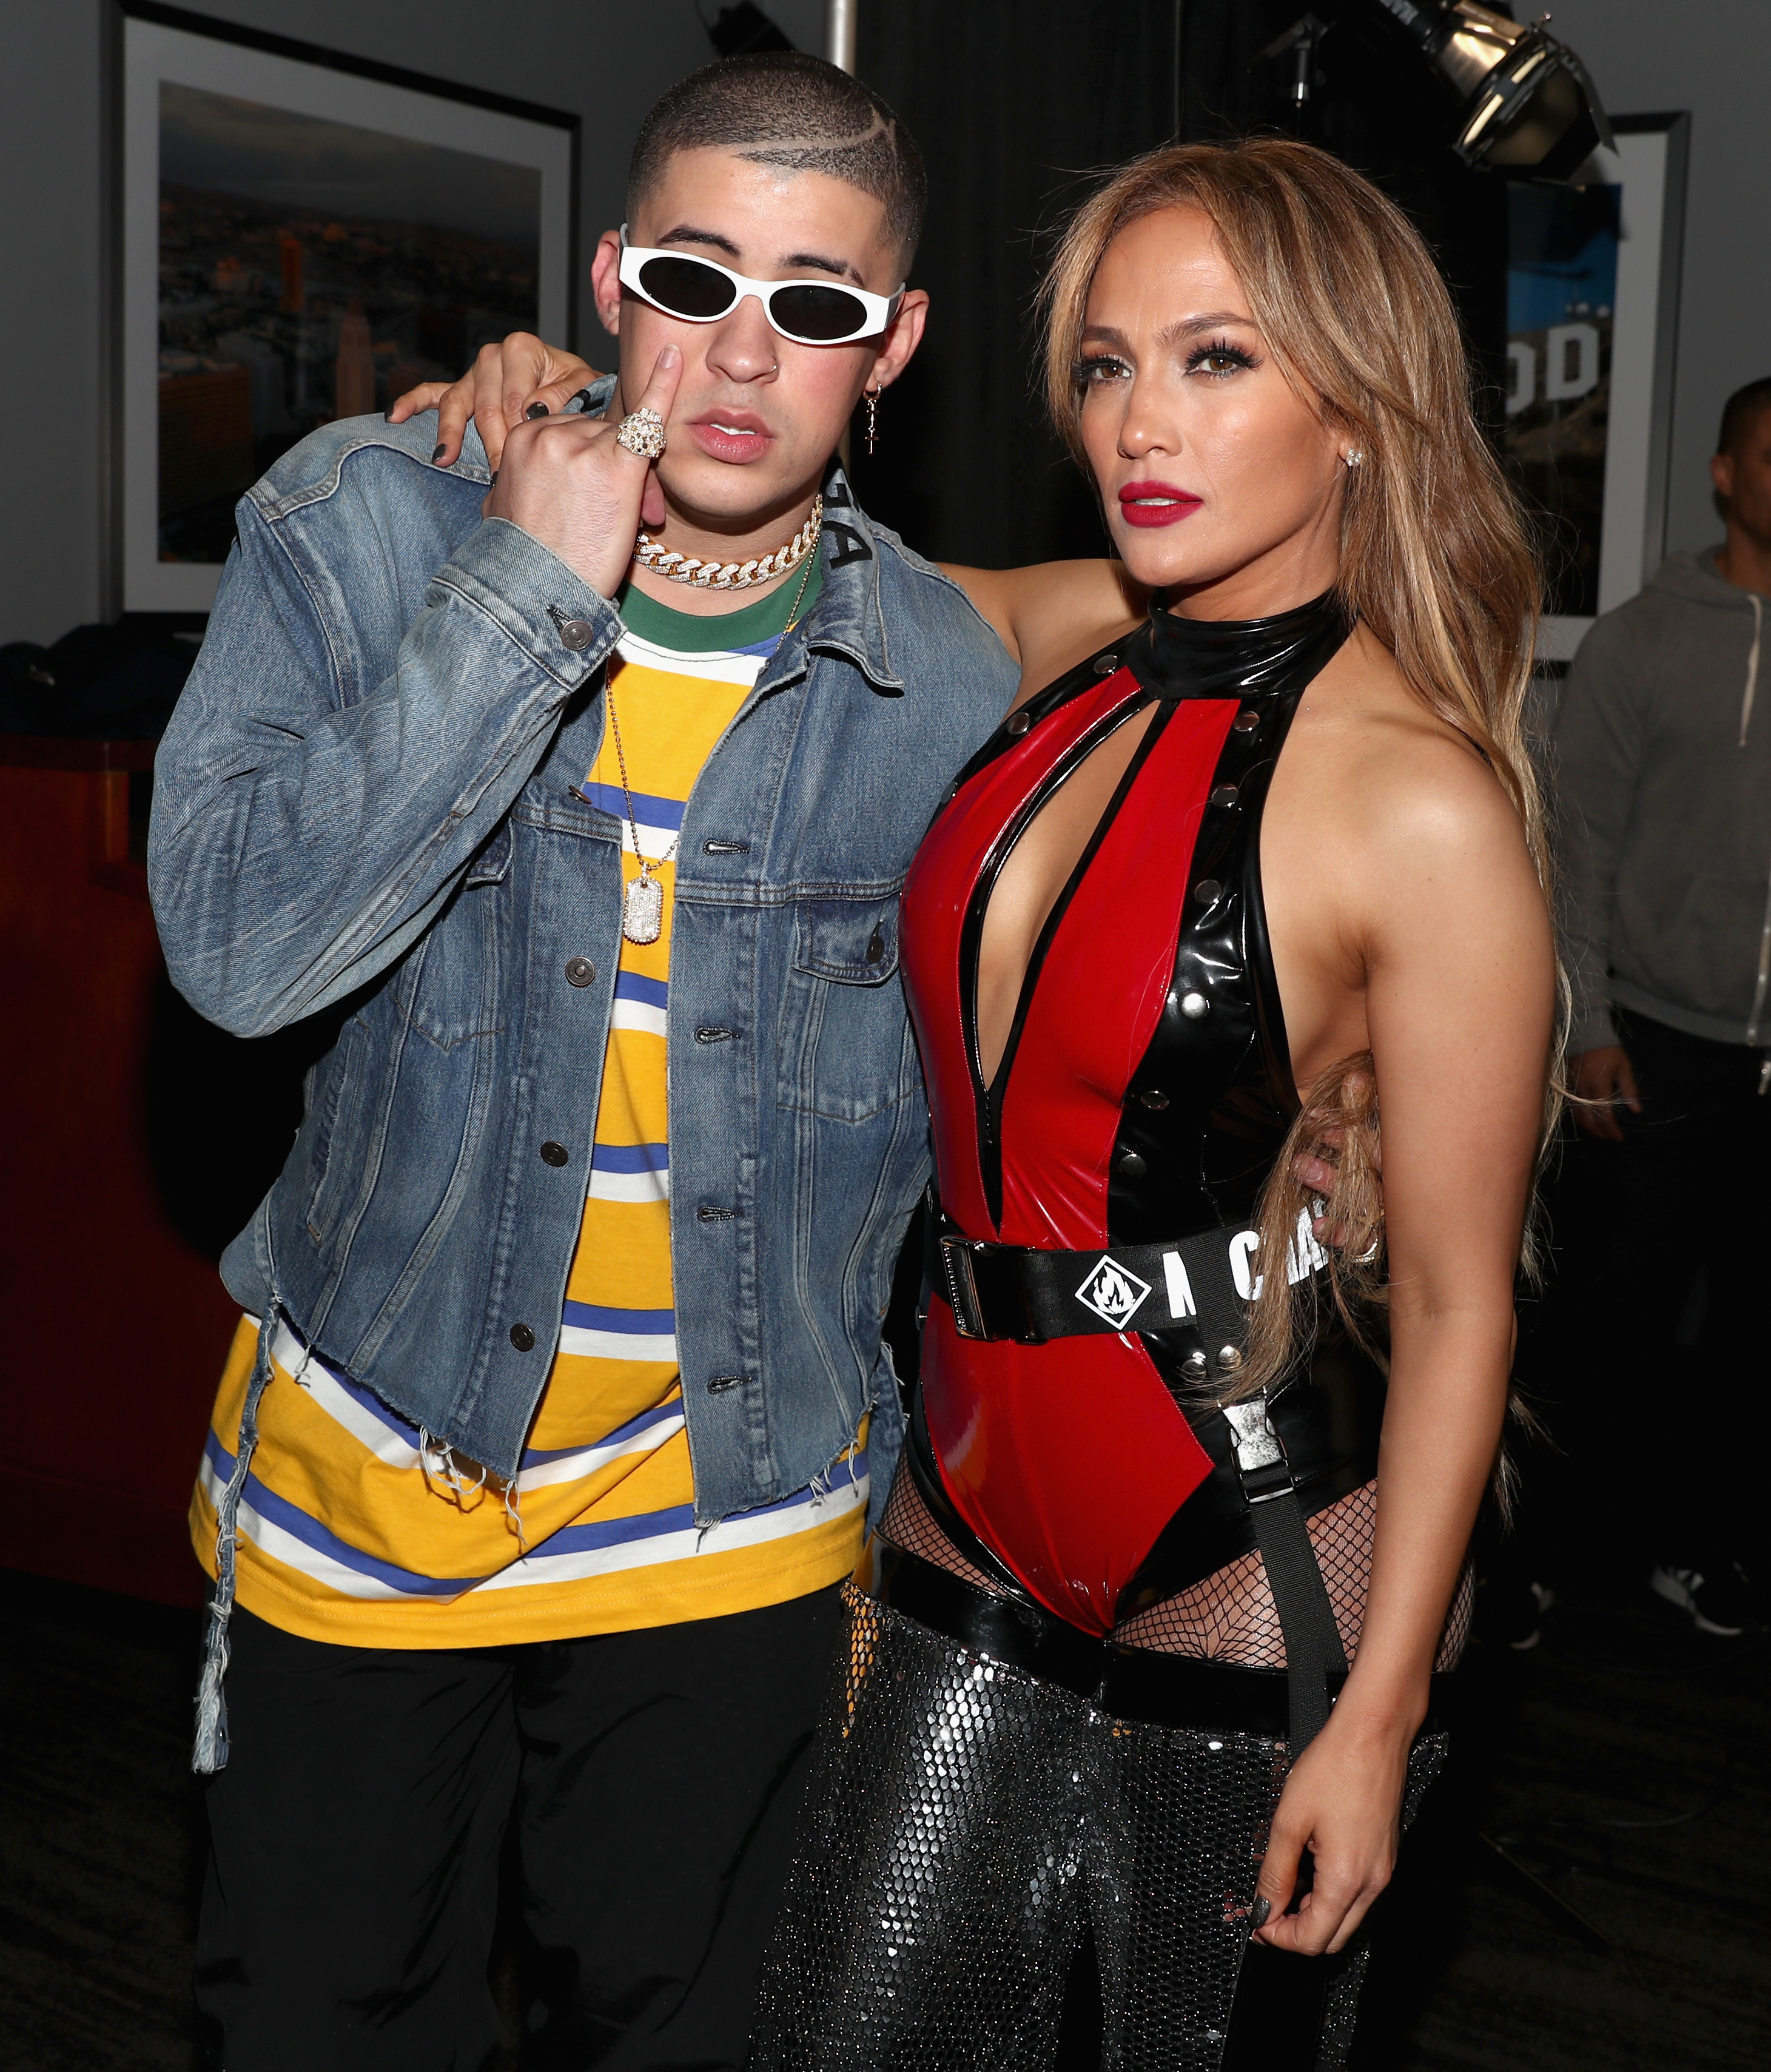 Bad Bunny and Jennifer Lopez with their arms around each other